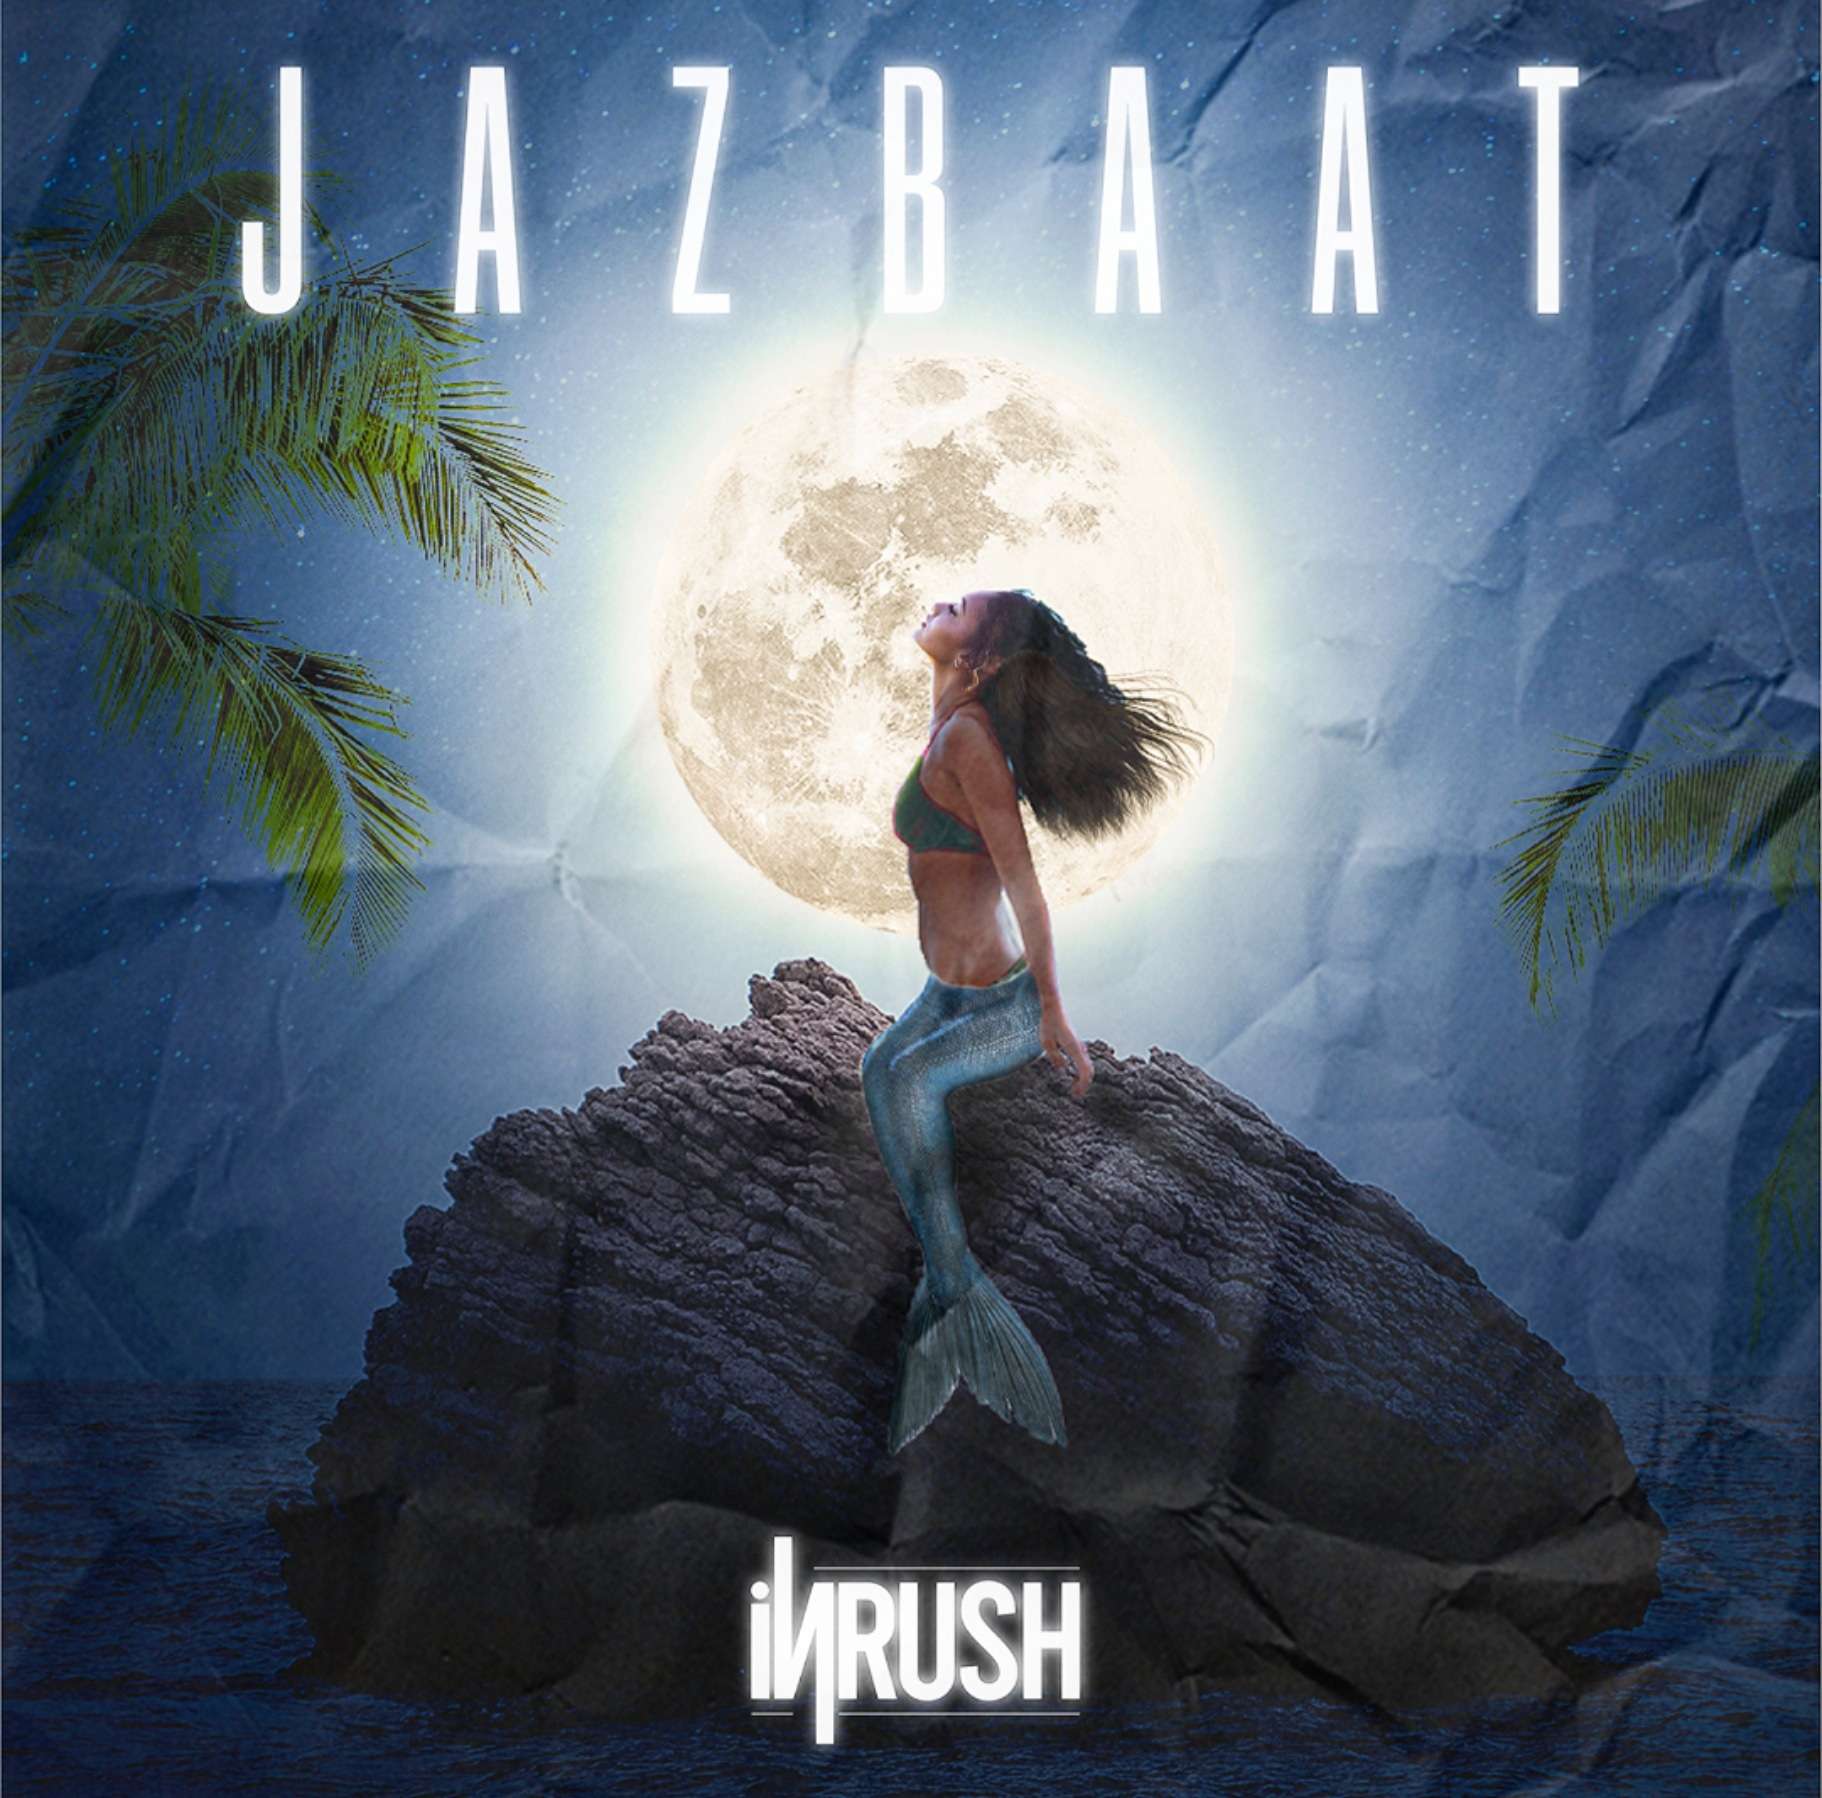 Inrush’s latest song “Jazbaat” is his daily diary’s emotions penned beautifully in a soulful track that will touch your hear. Listen Now